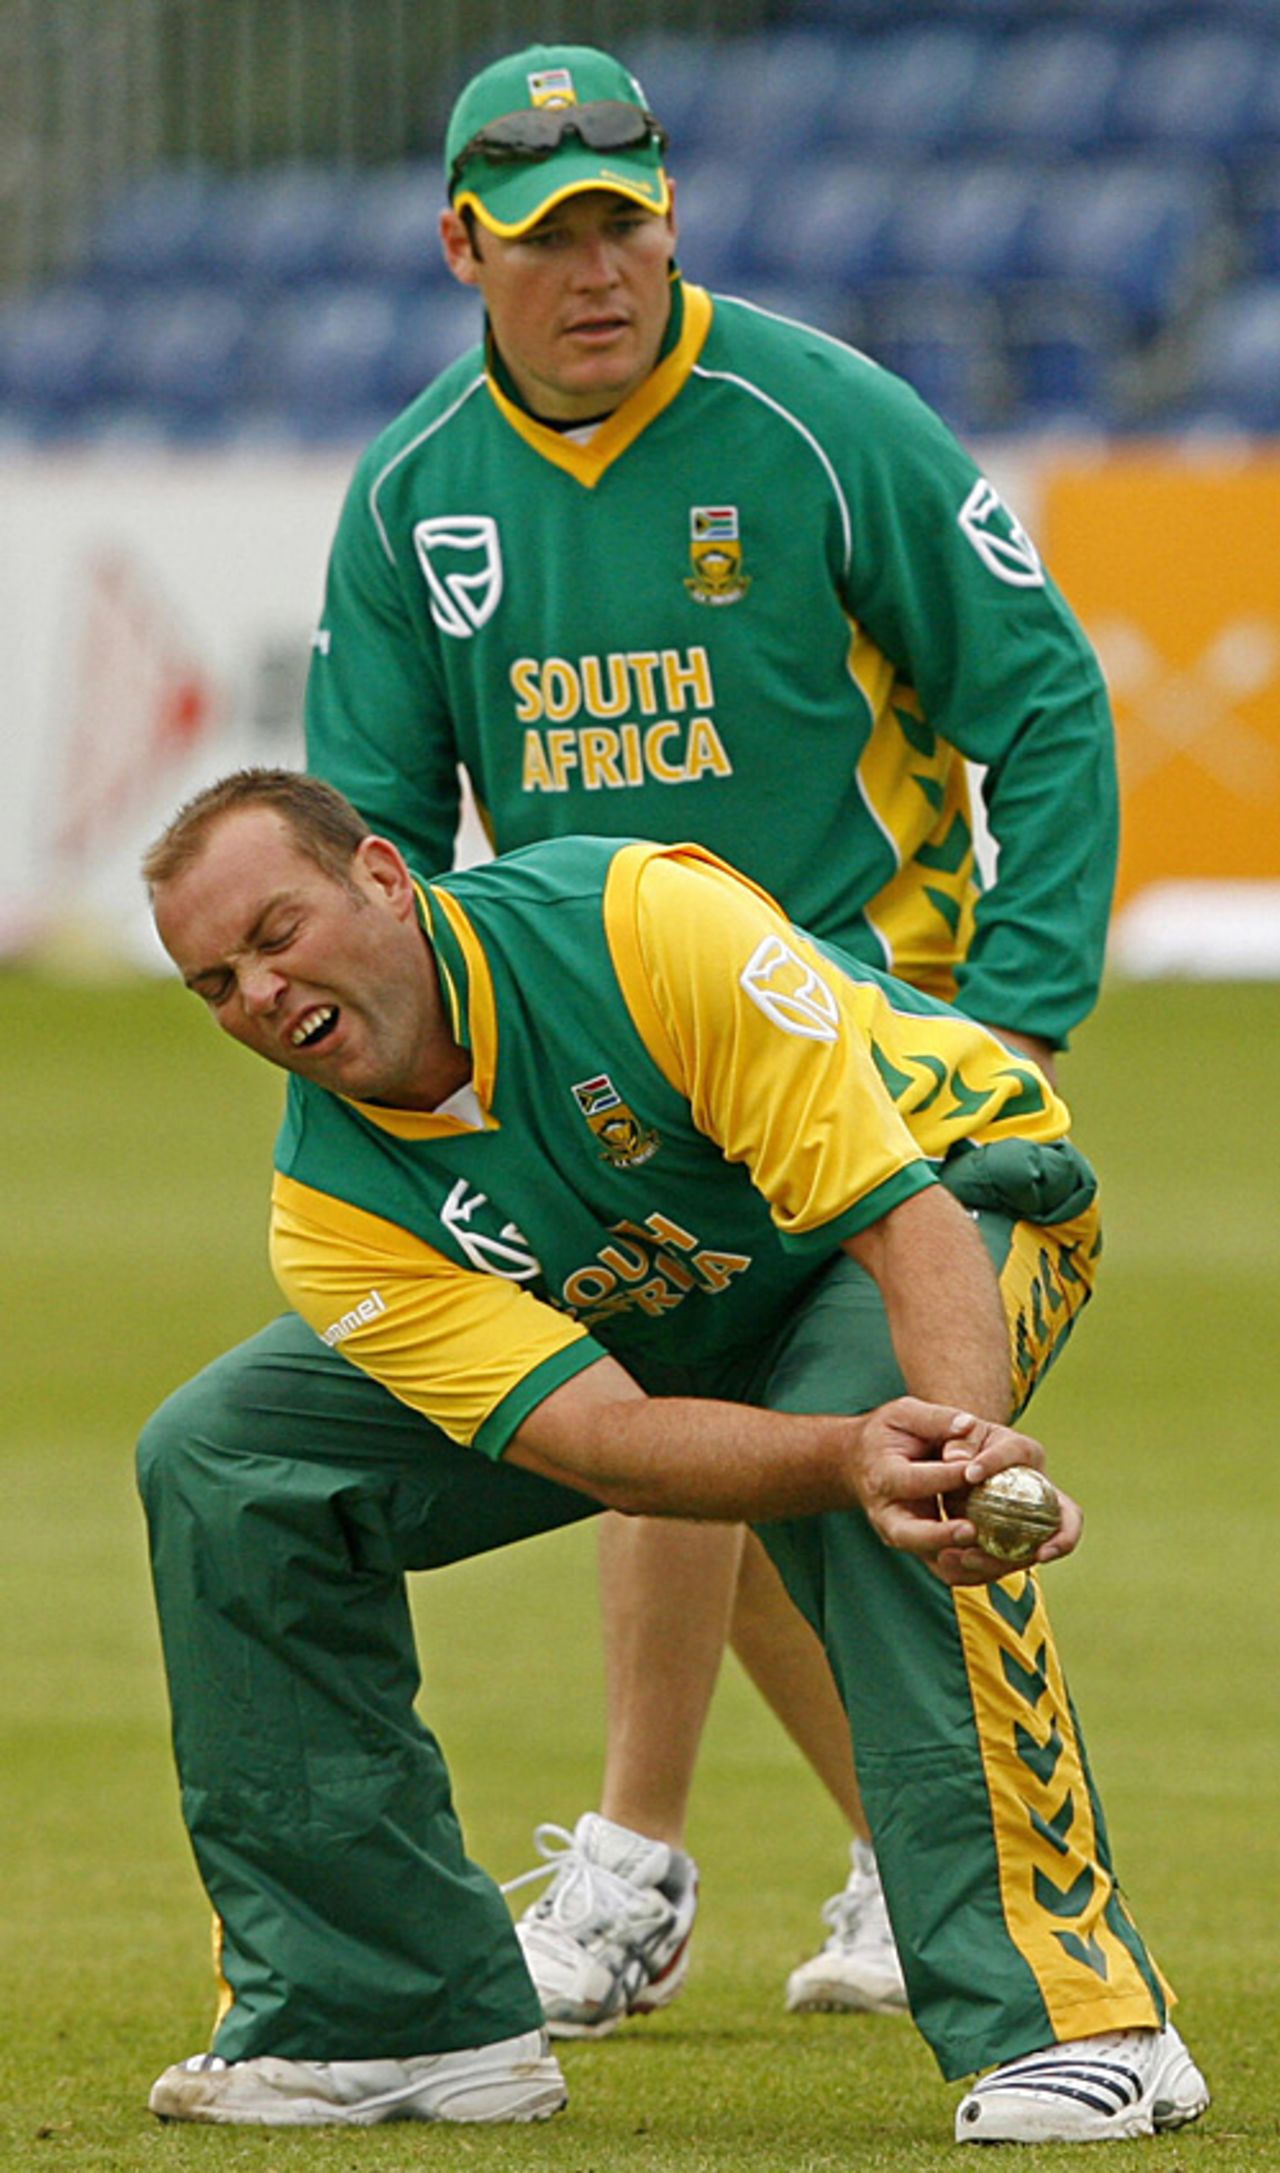 Jacques Kallis takes a sharp chance low to his left during a fielding session, Stormont, Belfast, June 28, 2007